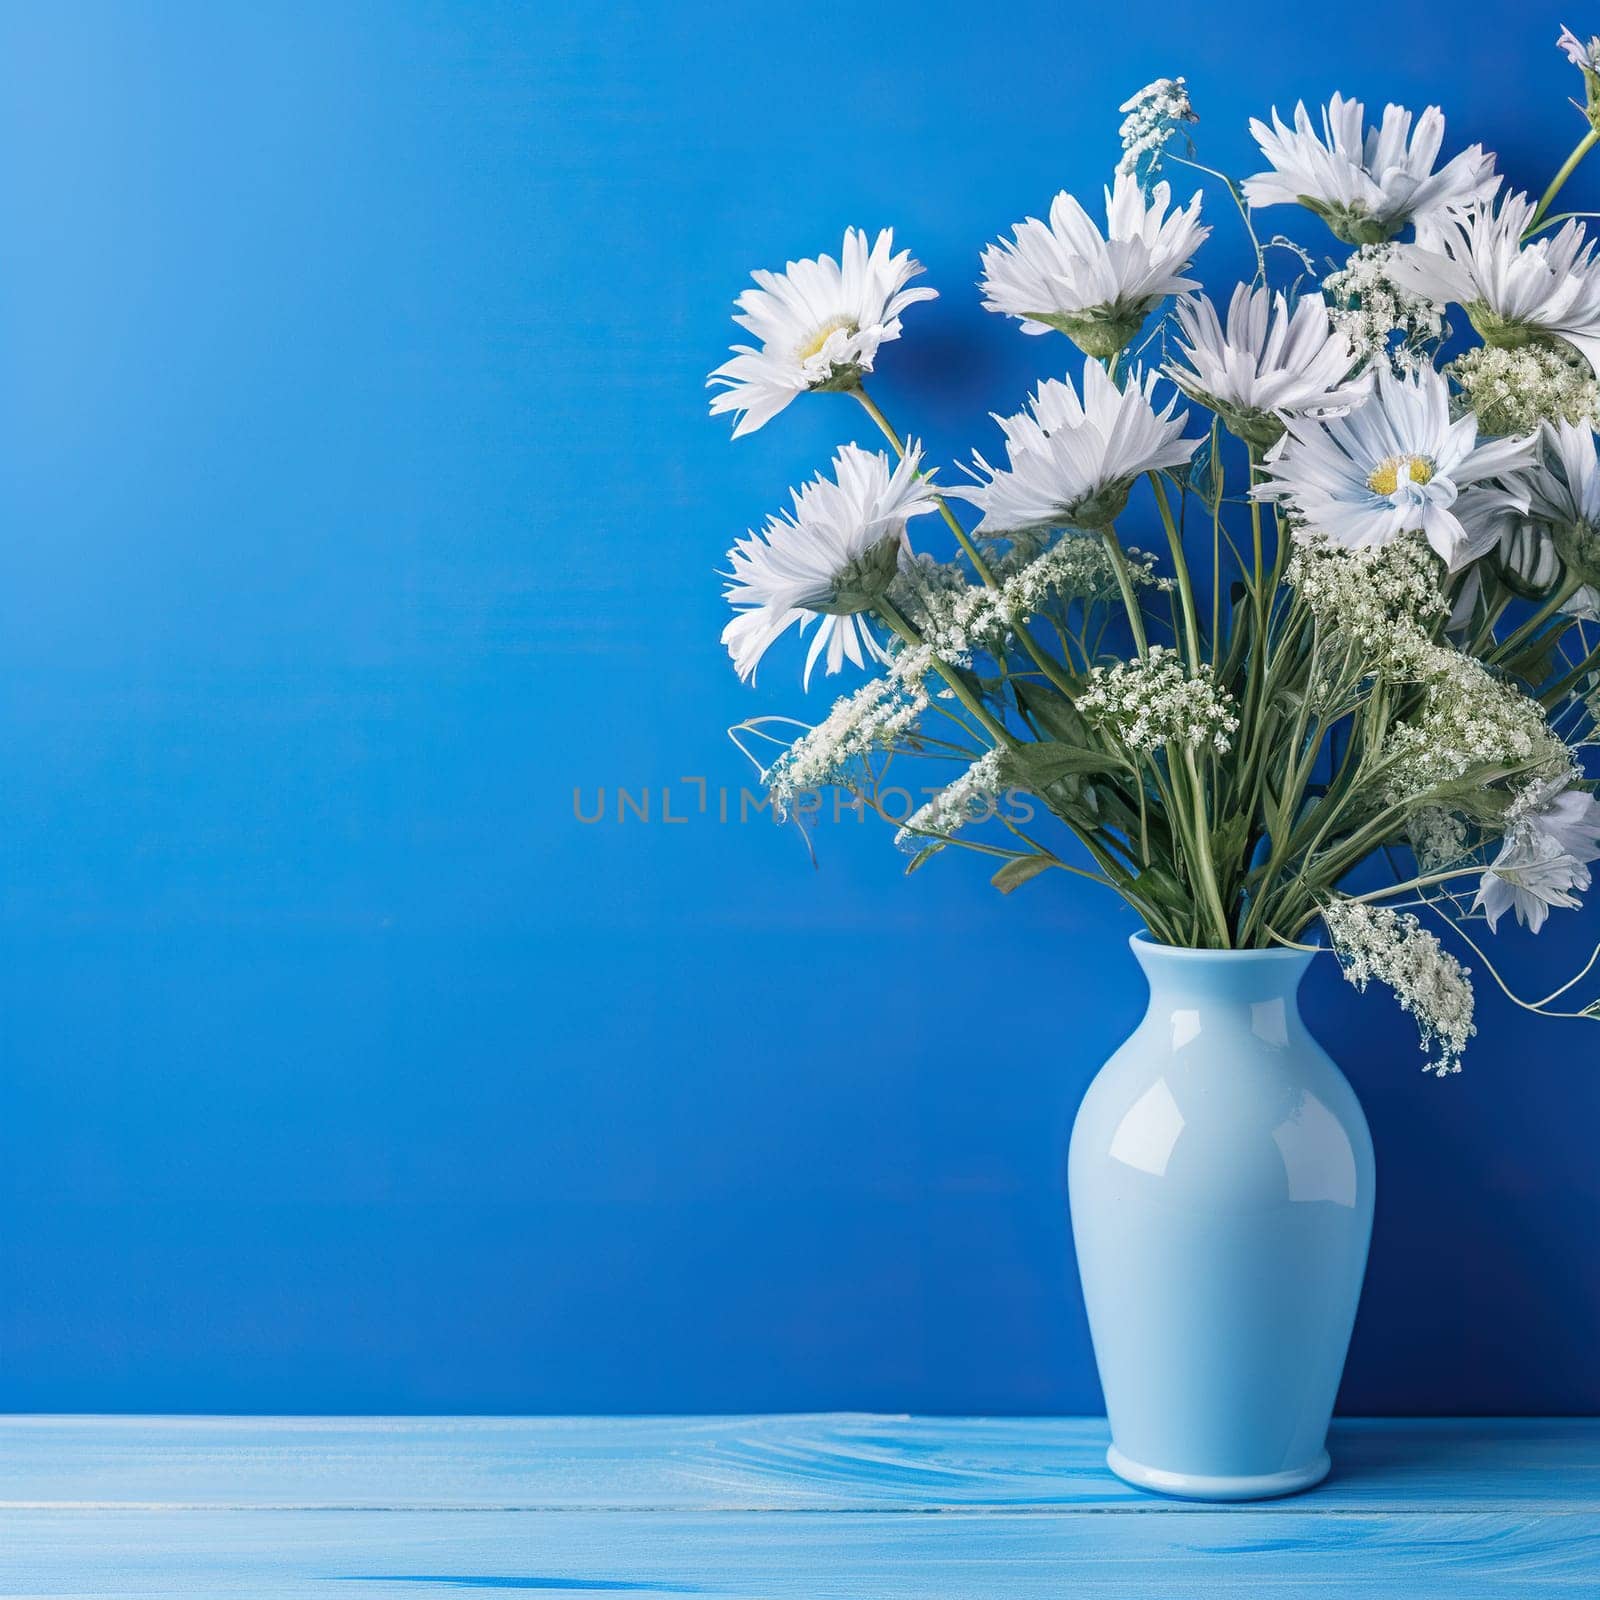 White daisies in a blue vase on a blue background.